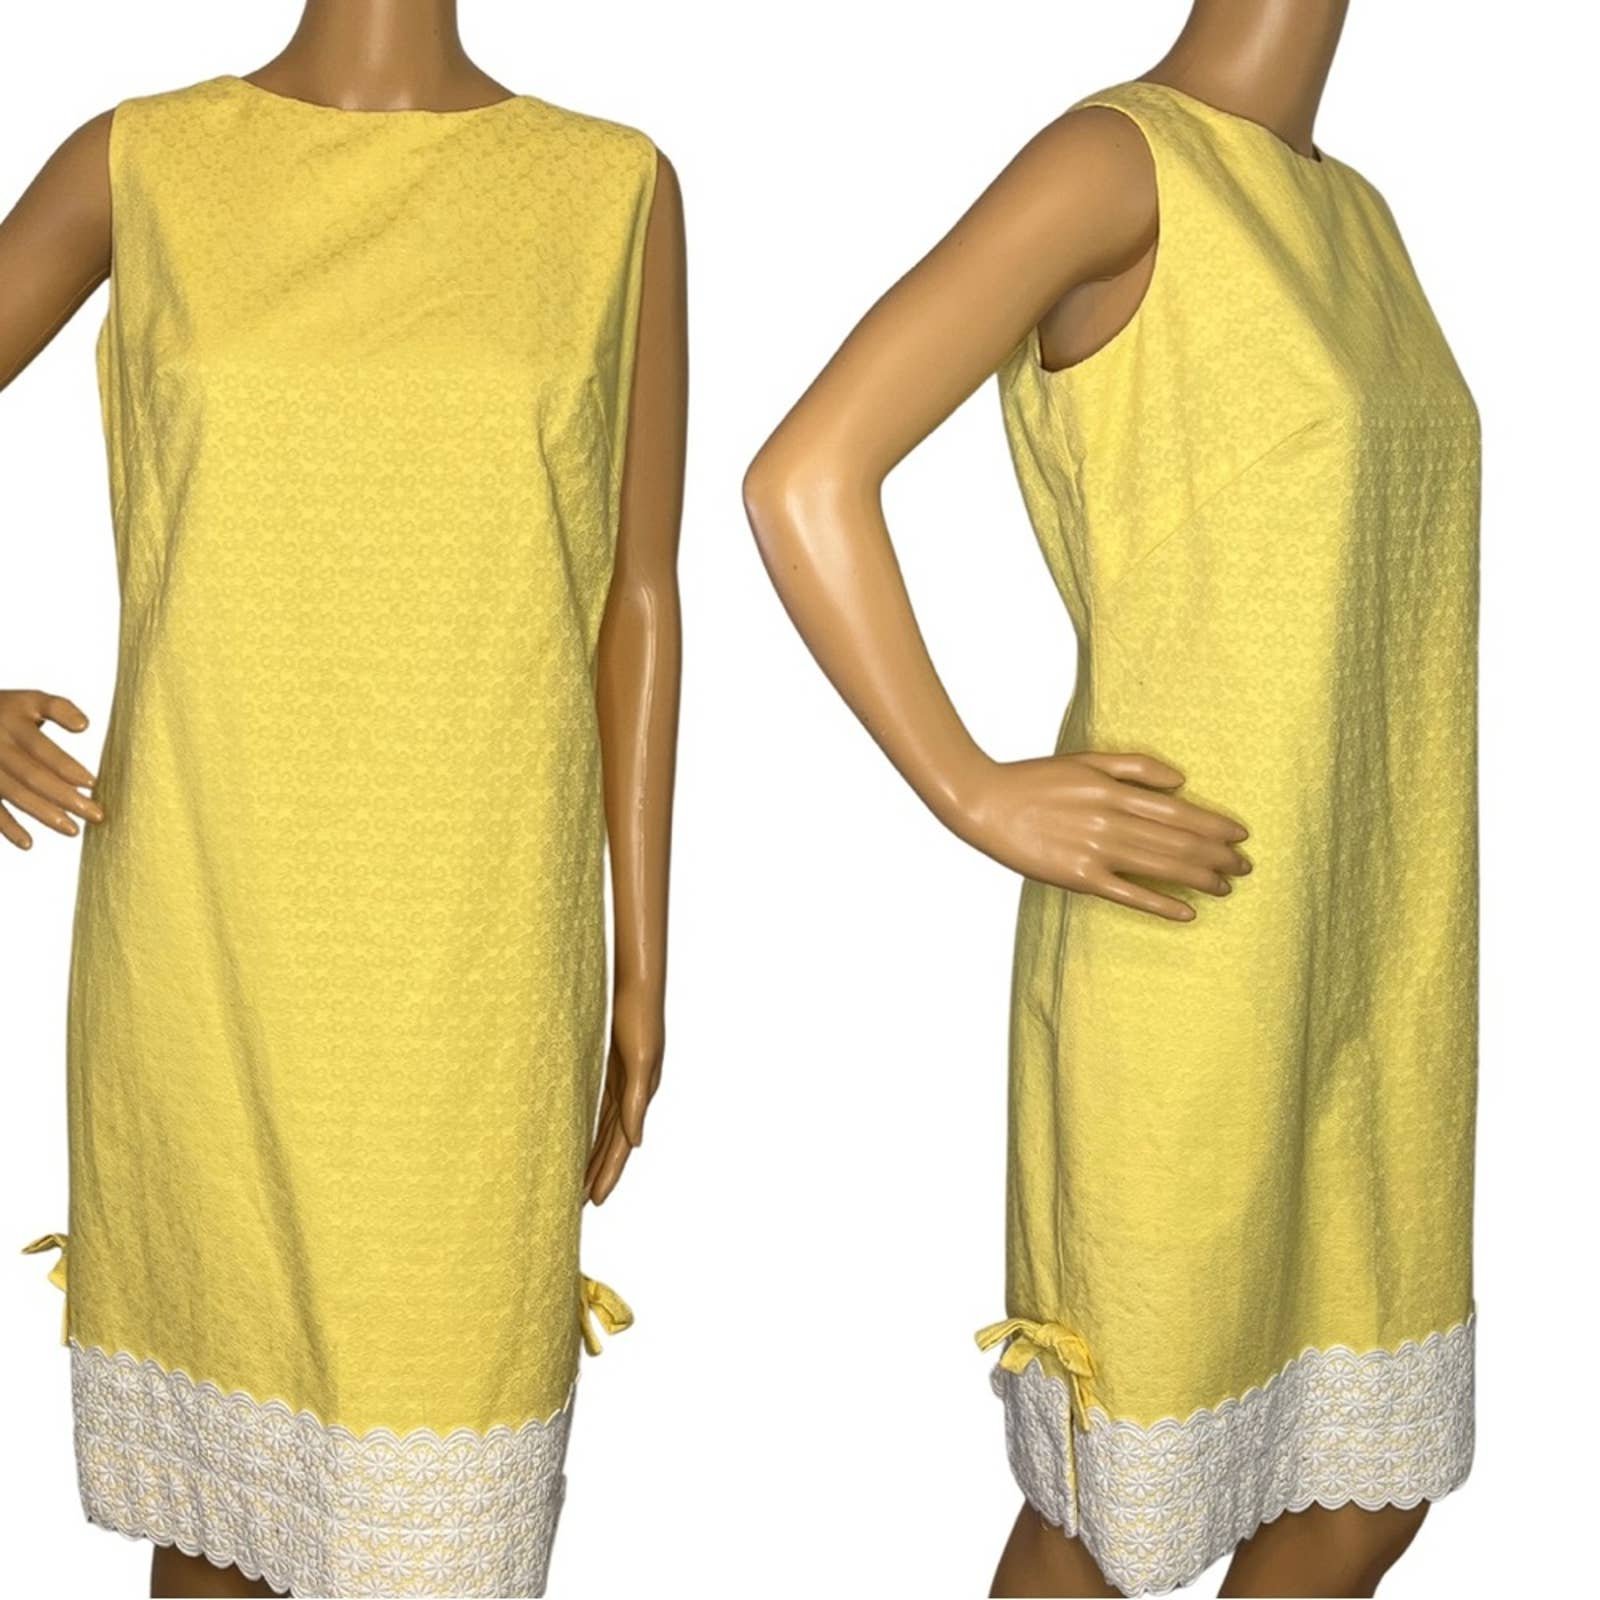 Personality Lilly Pulitzer Yellow Shift Dress with White Crochet Hem Size 12 orhG1yfOP Online Exclusive